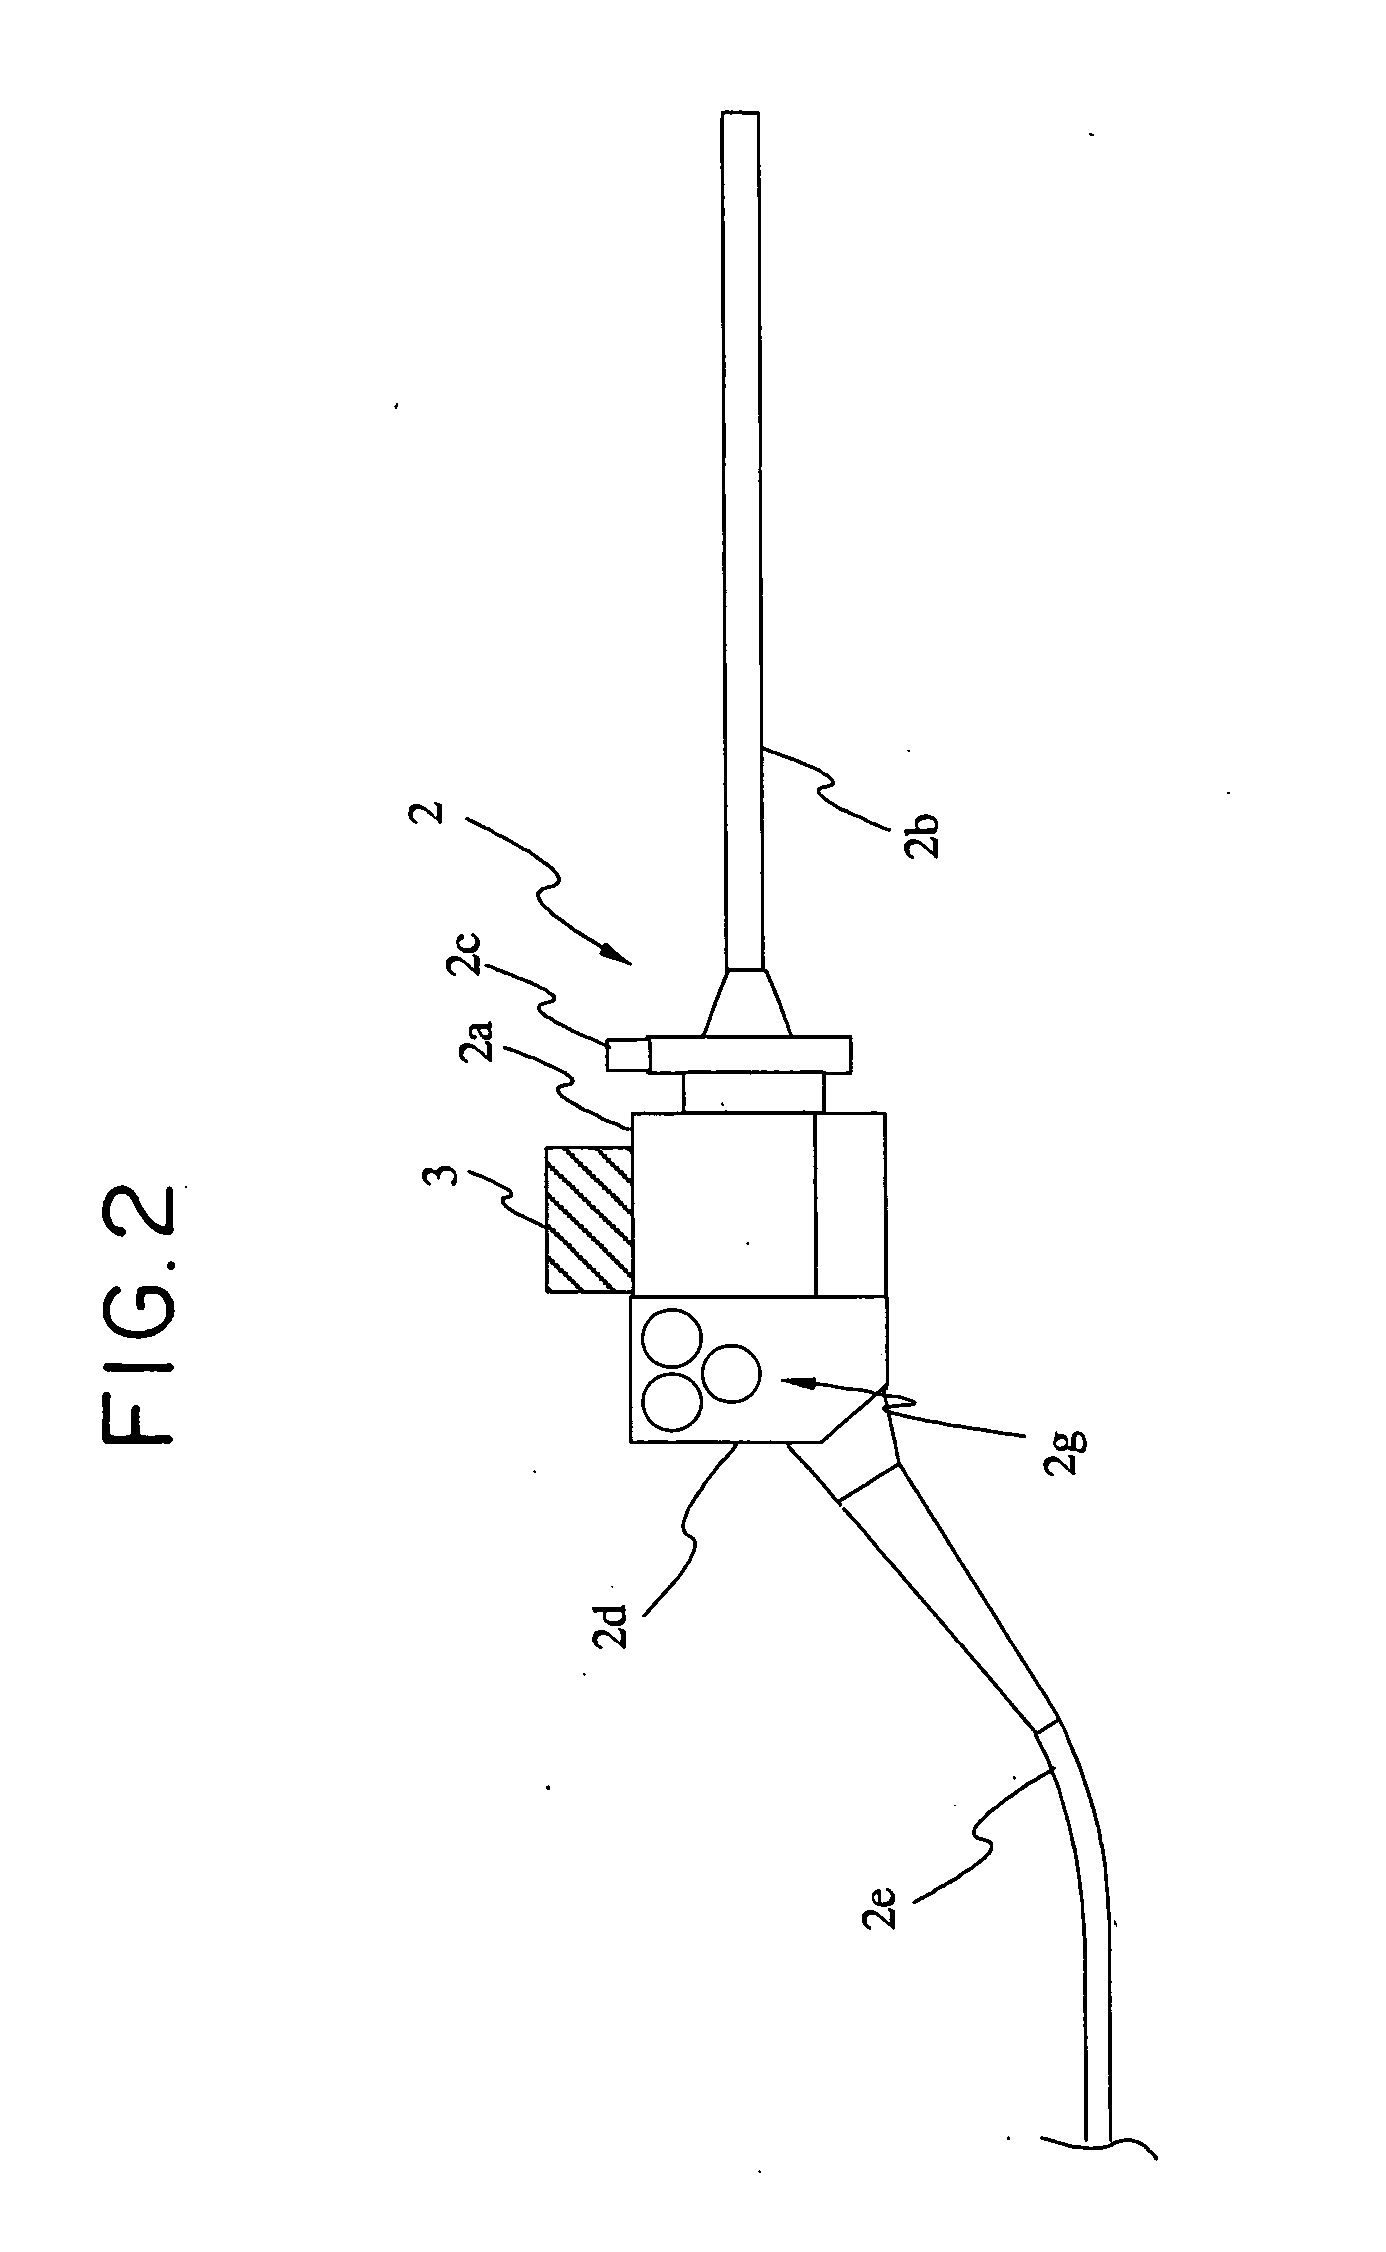 Medical procedure support system and method